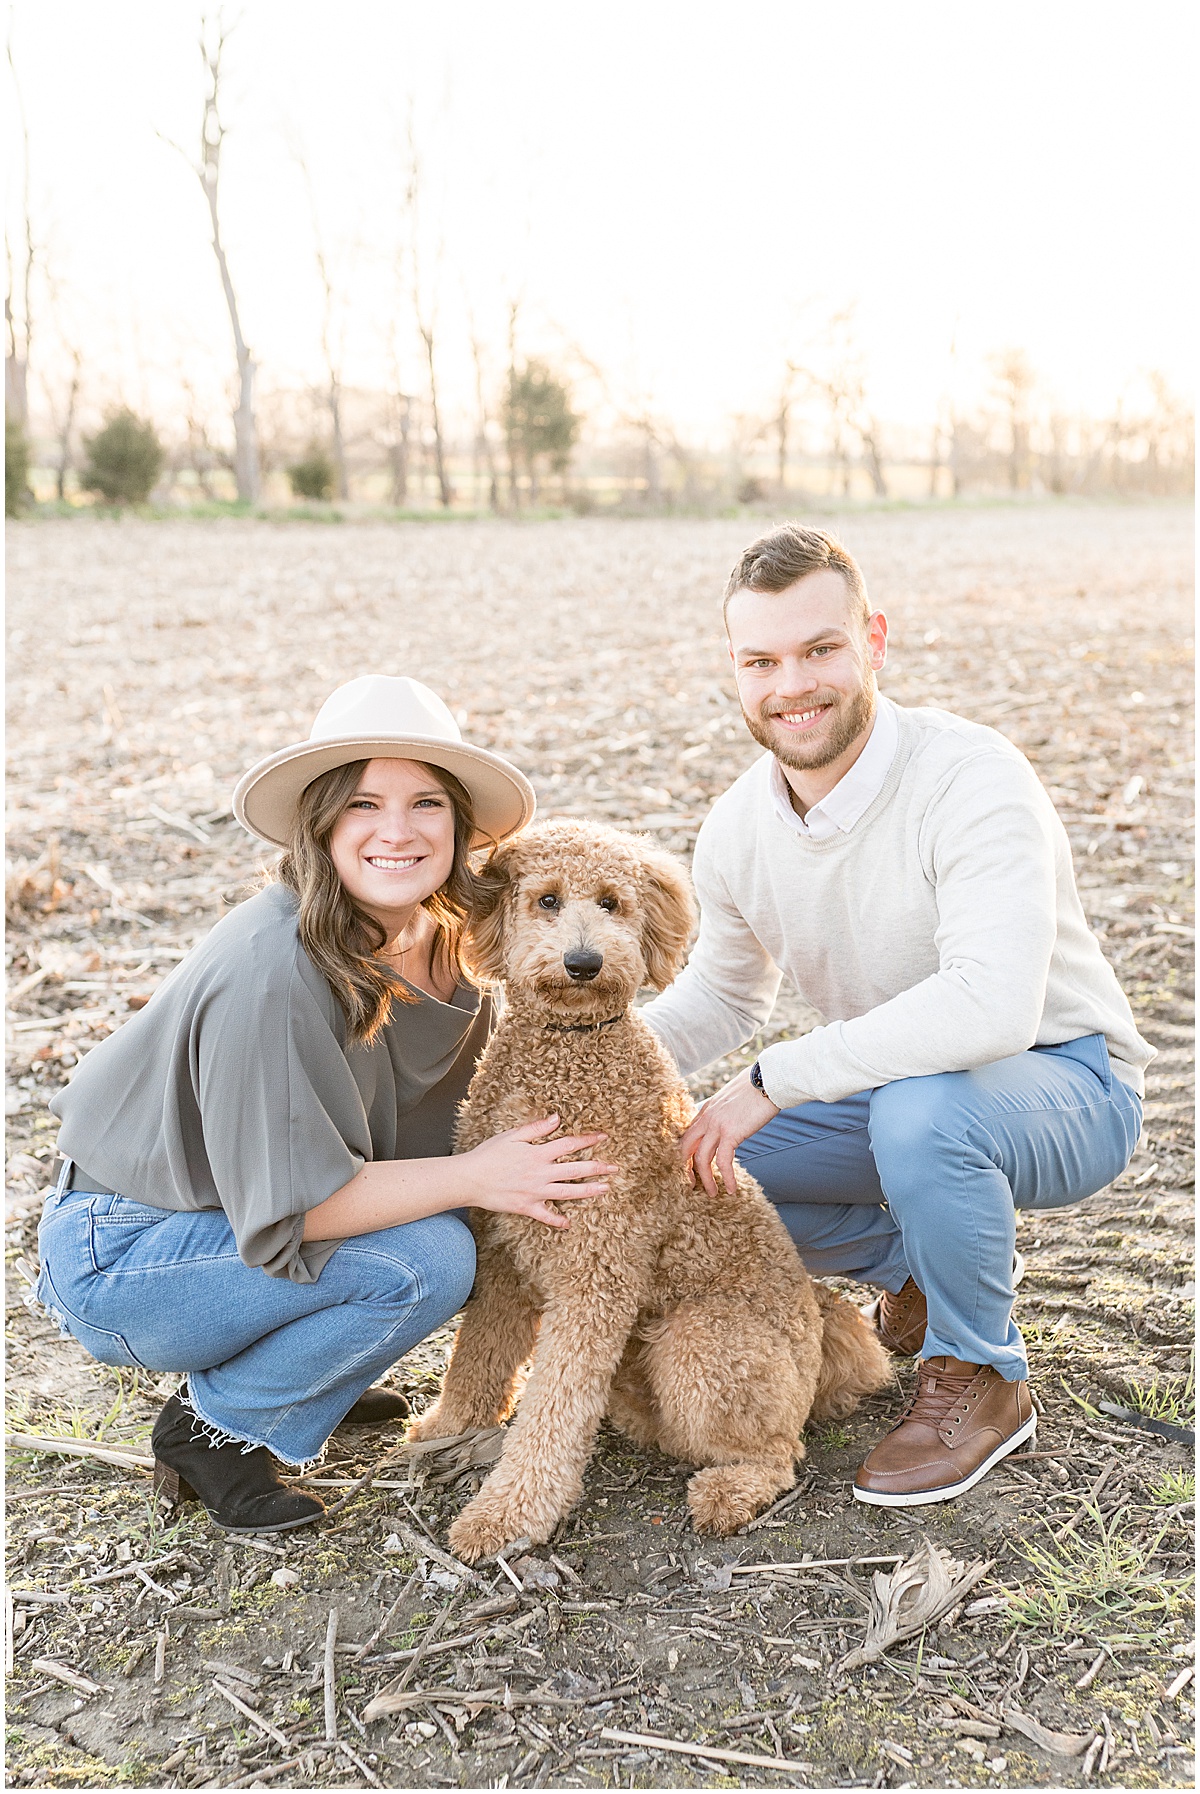 Country engagement photos in Lebanon, Indiana with dog